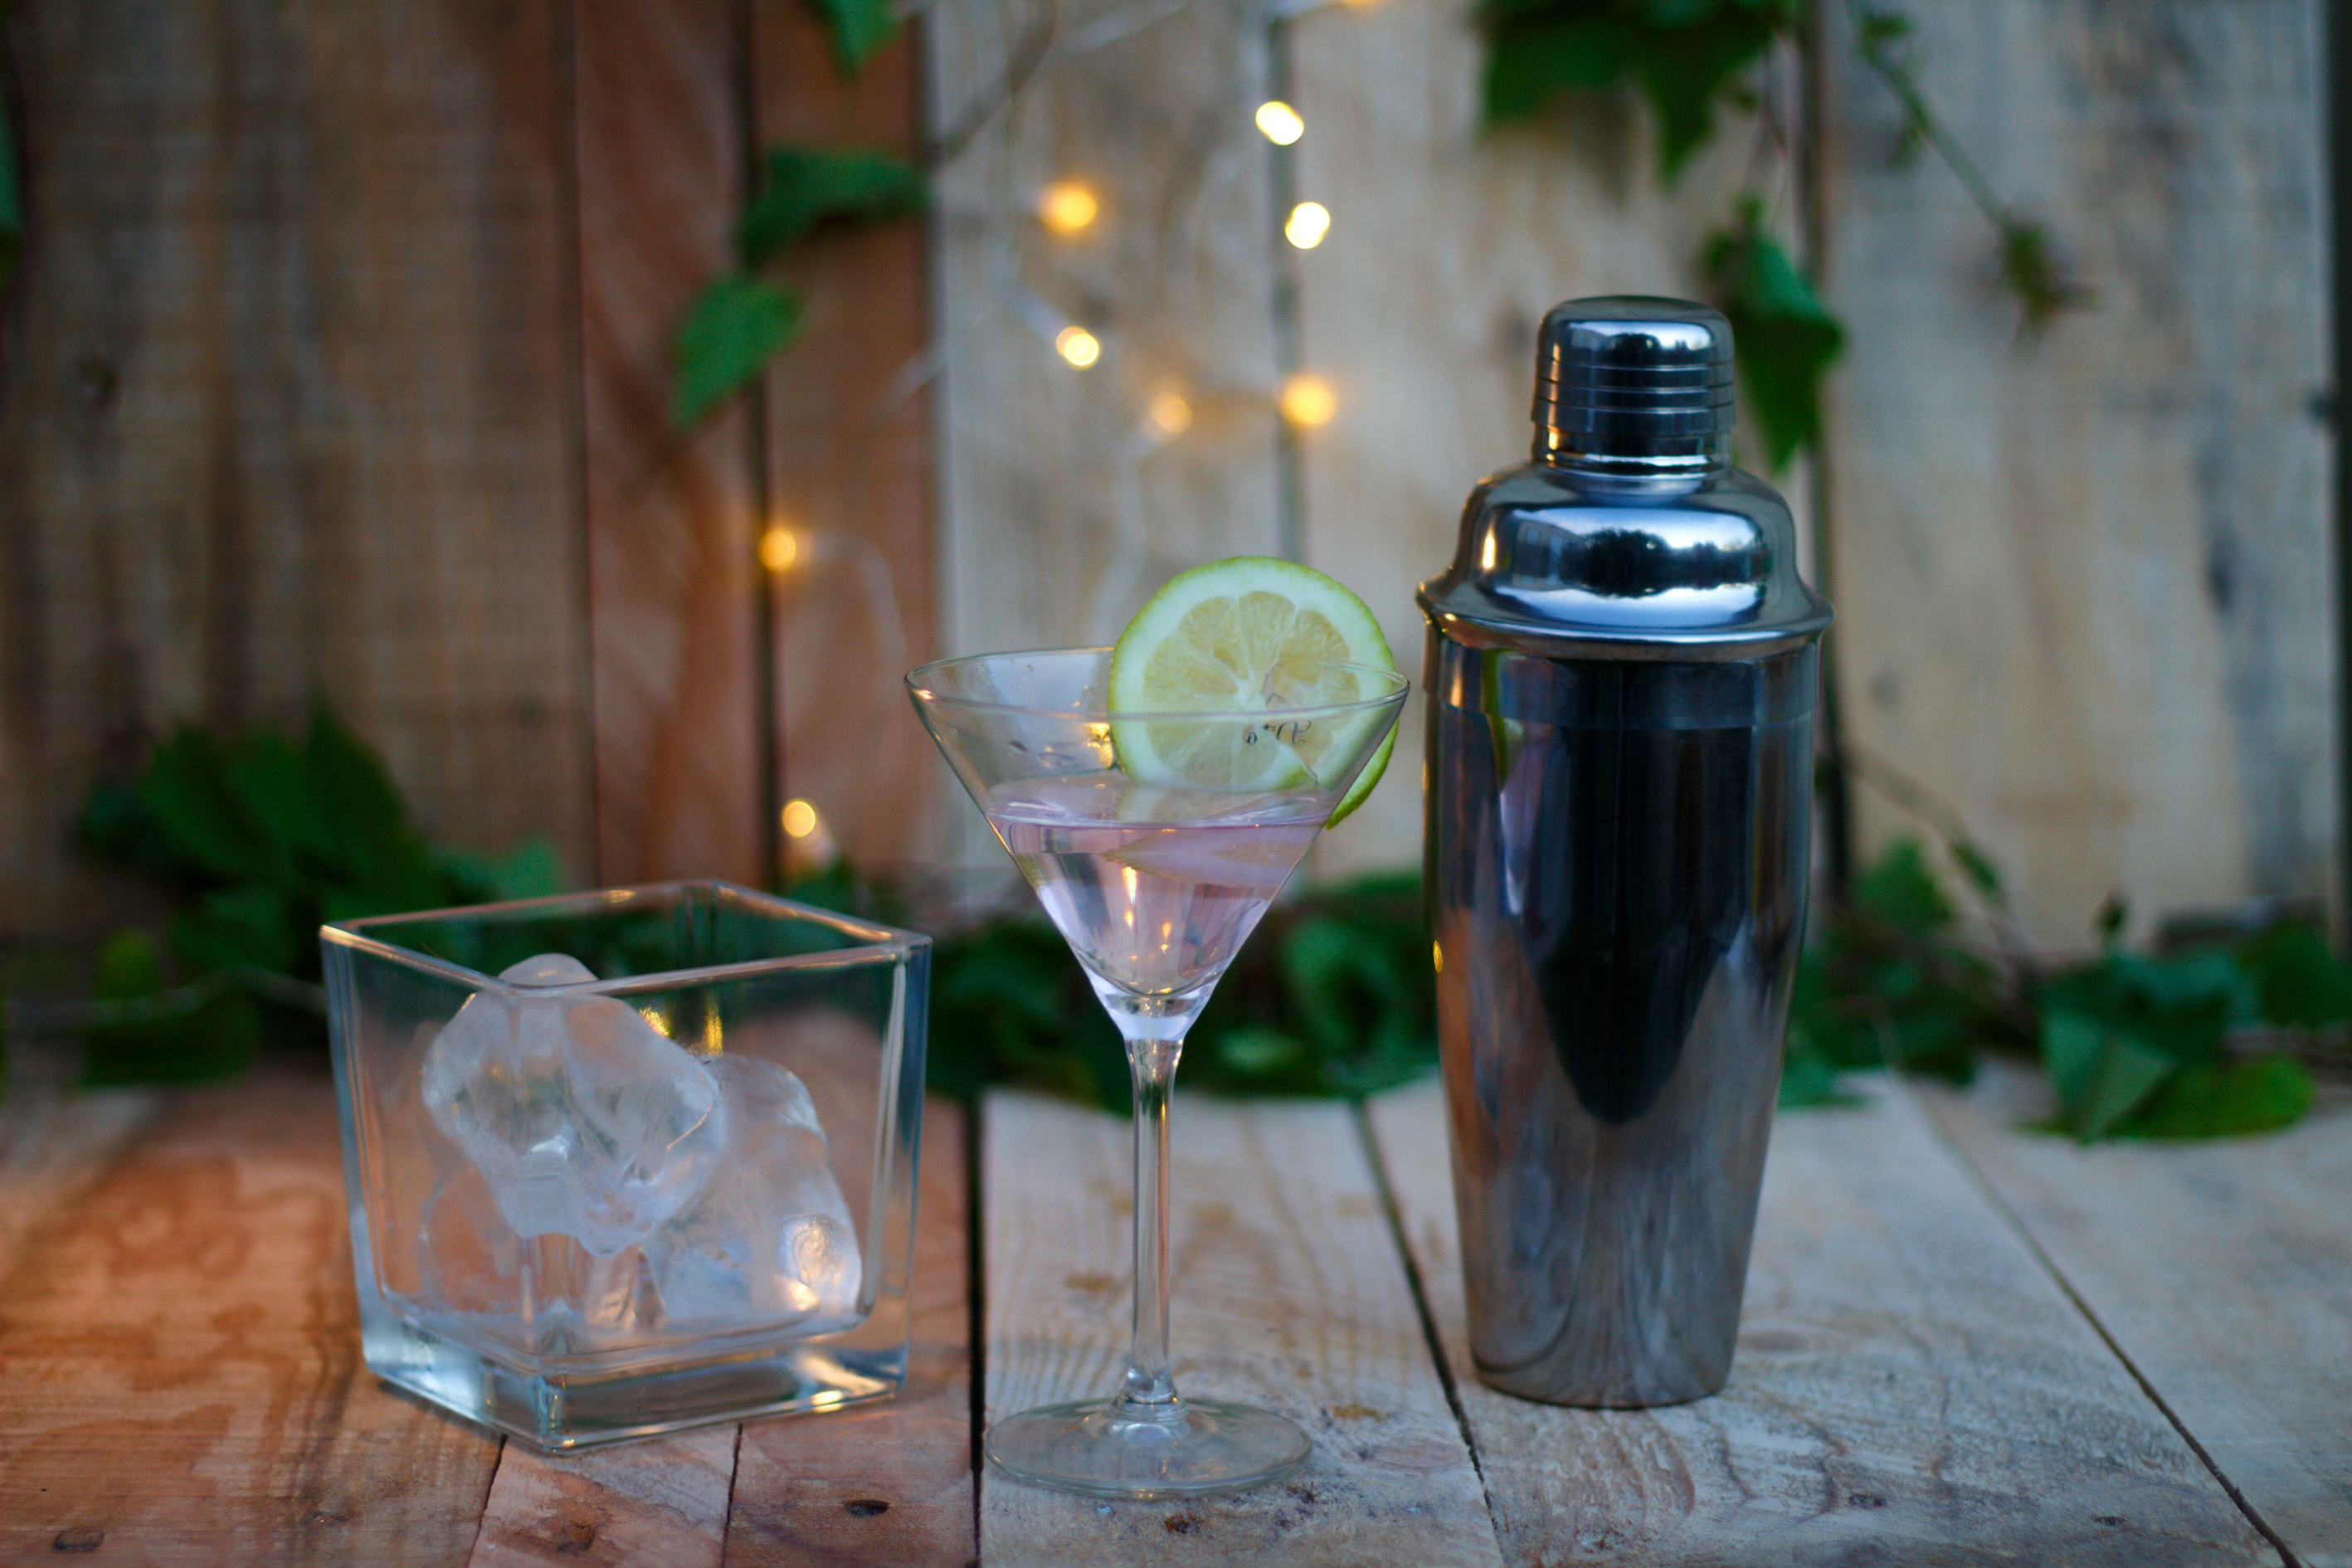 Cocktail shaker with ice and lemon